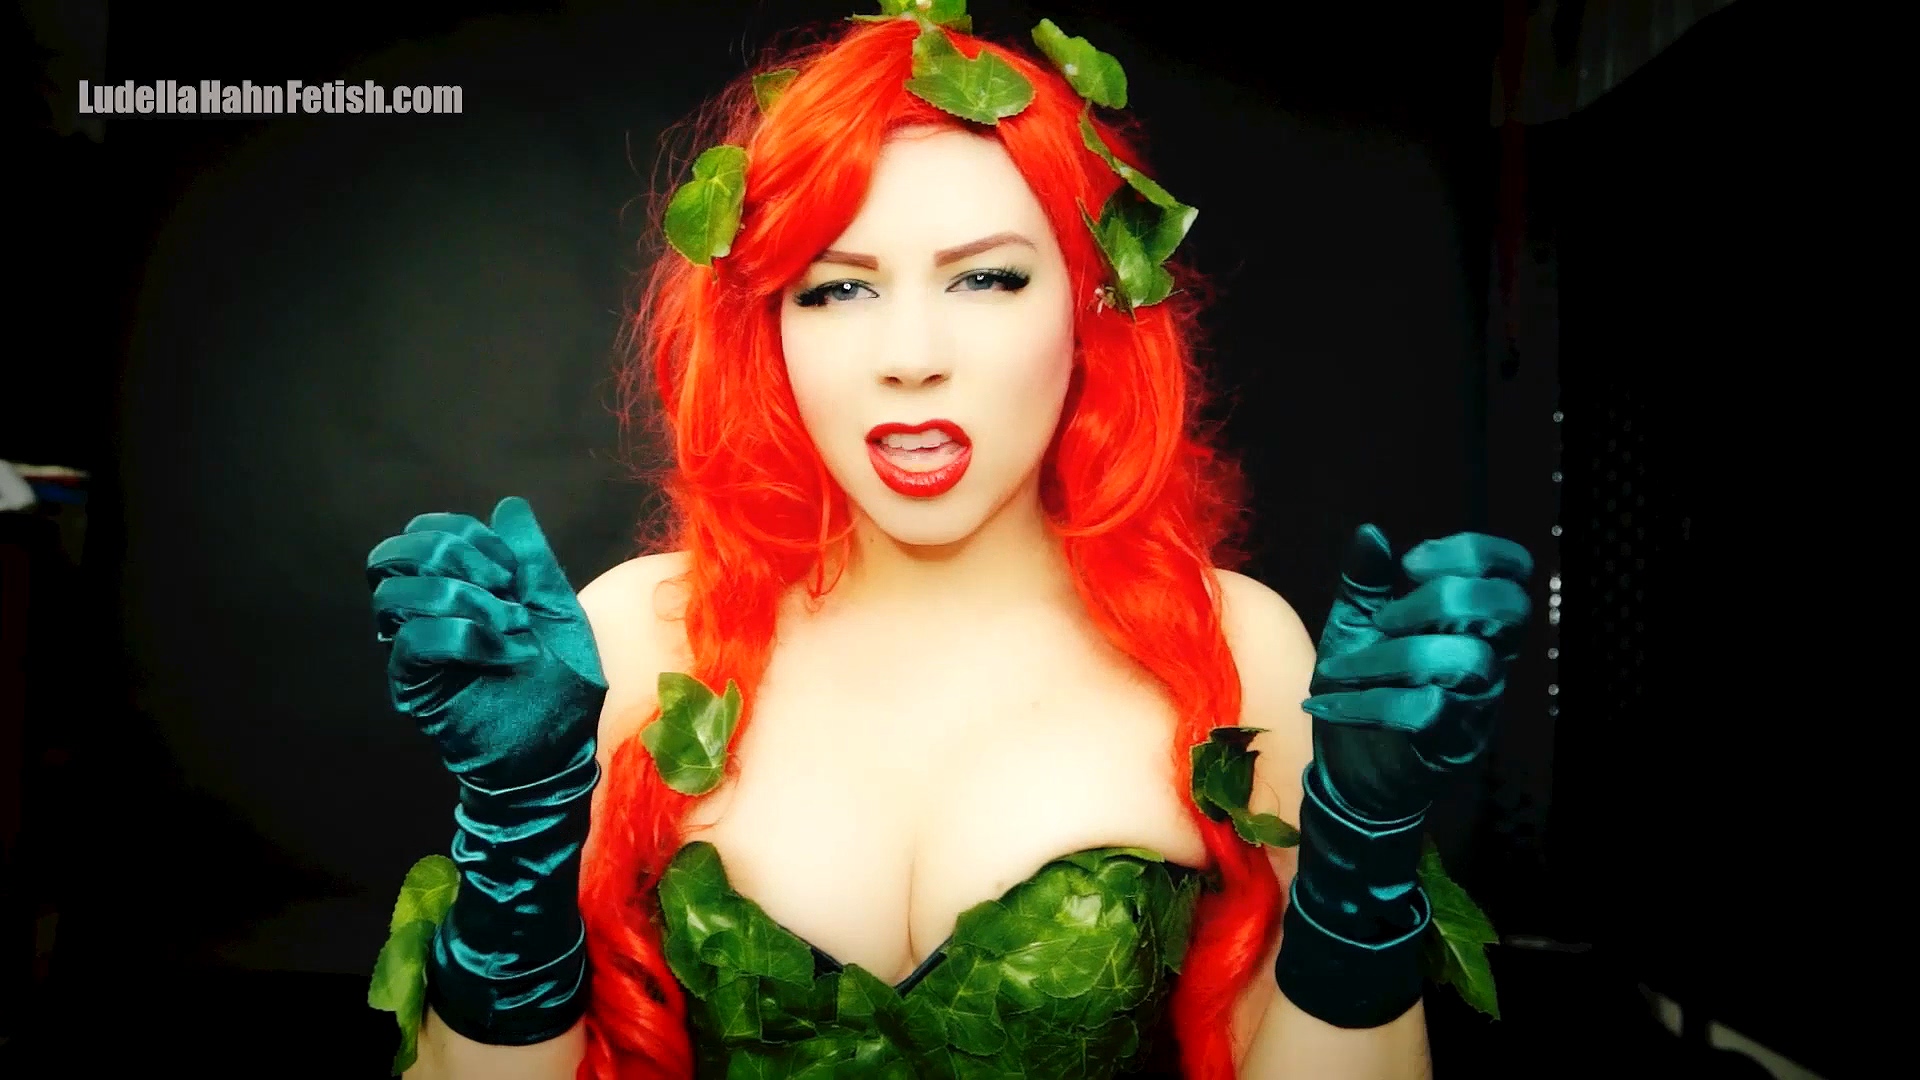 angel fathun recommends ludella hahn poison ivy pic